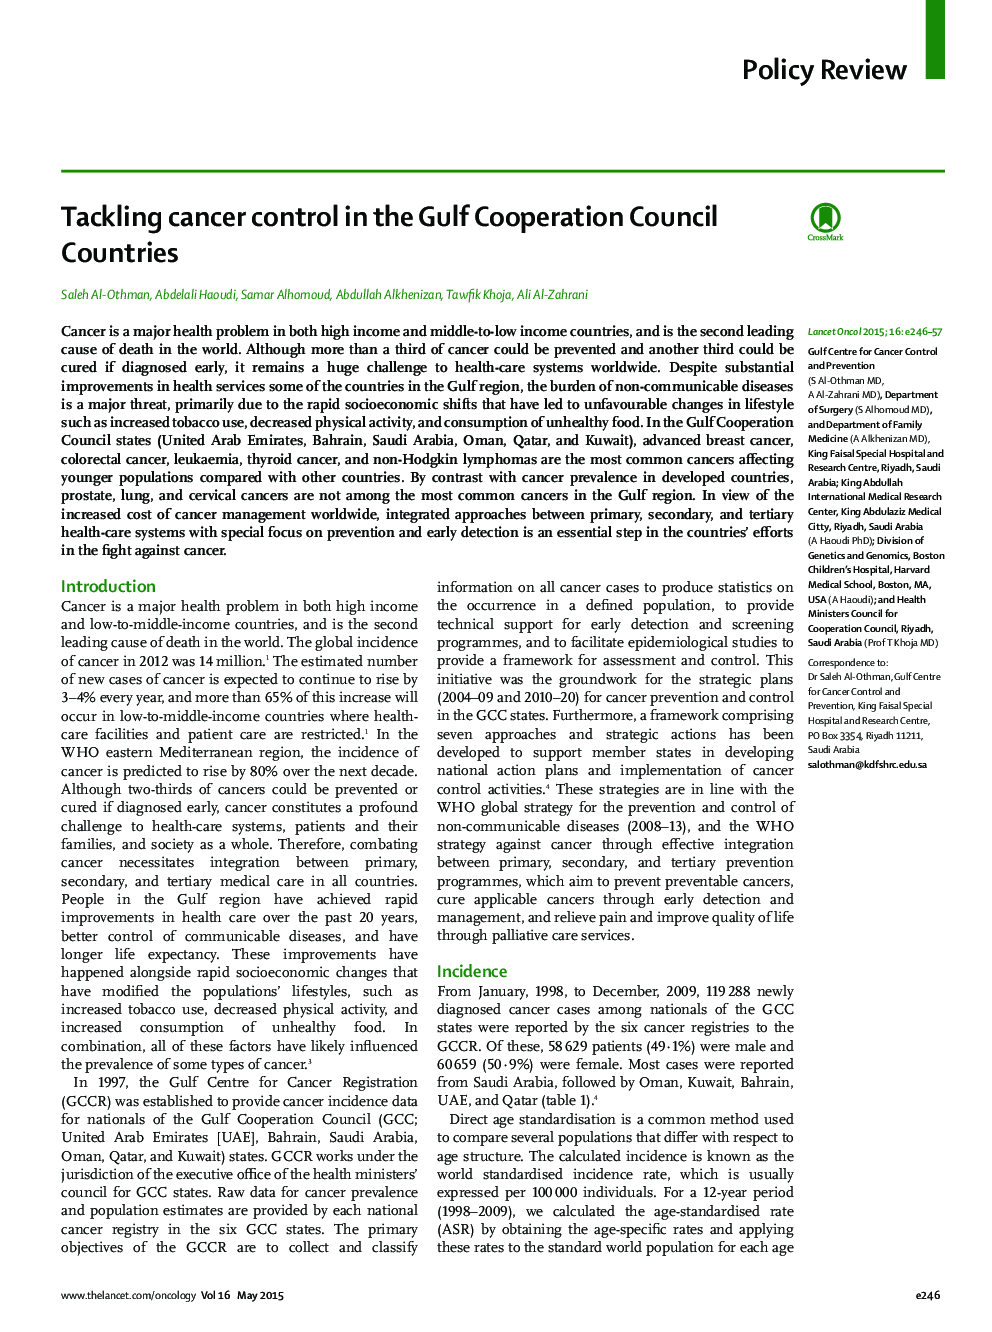 Tackling cancer control in the Gulf Cooperation Council Countries